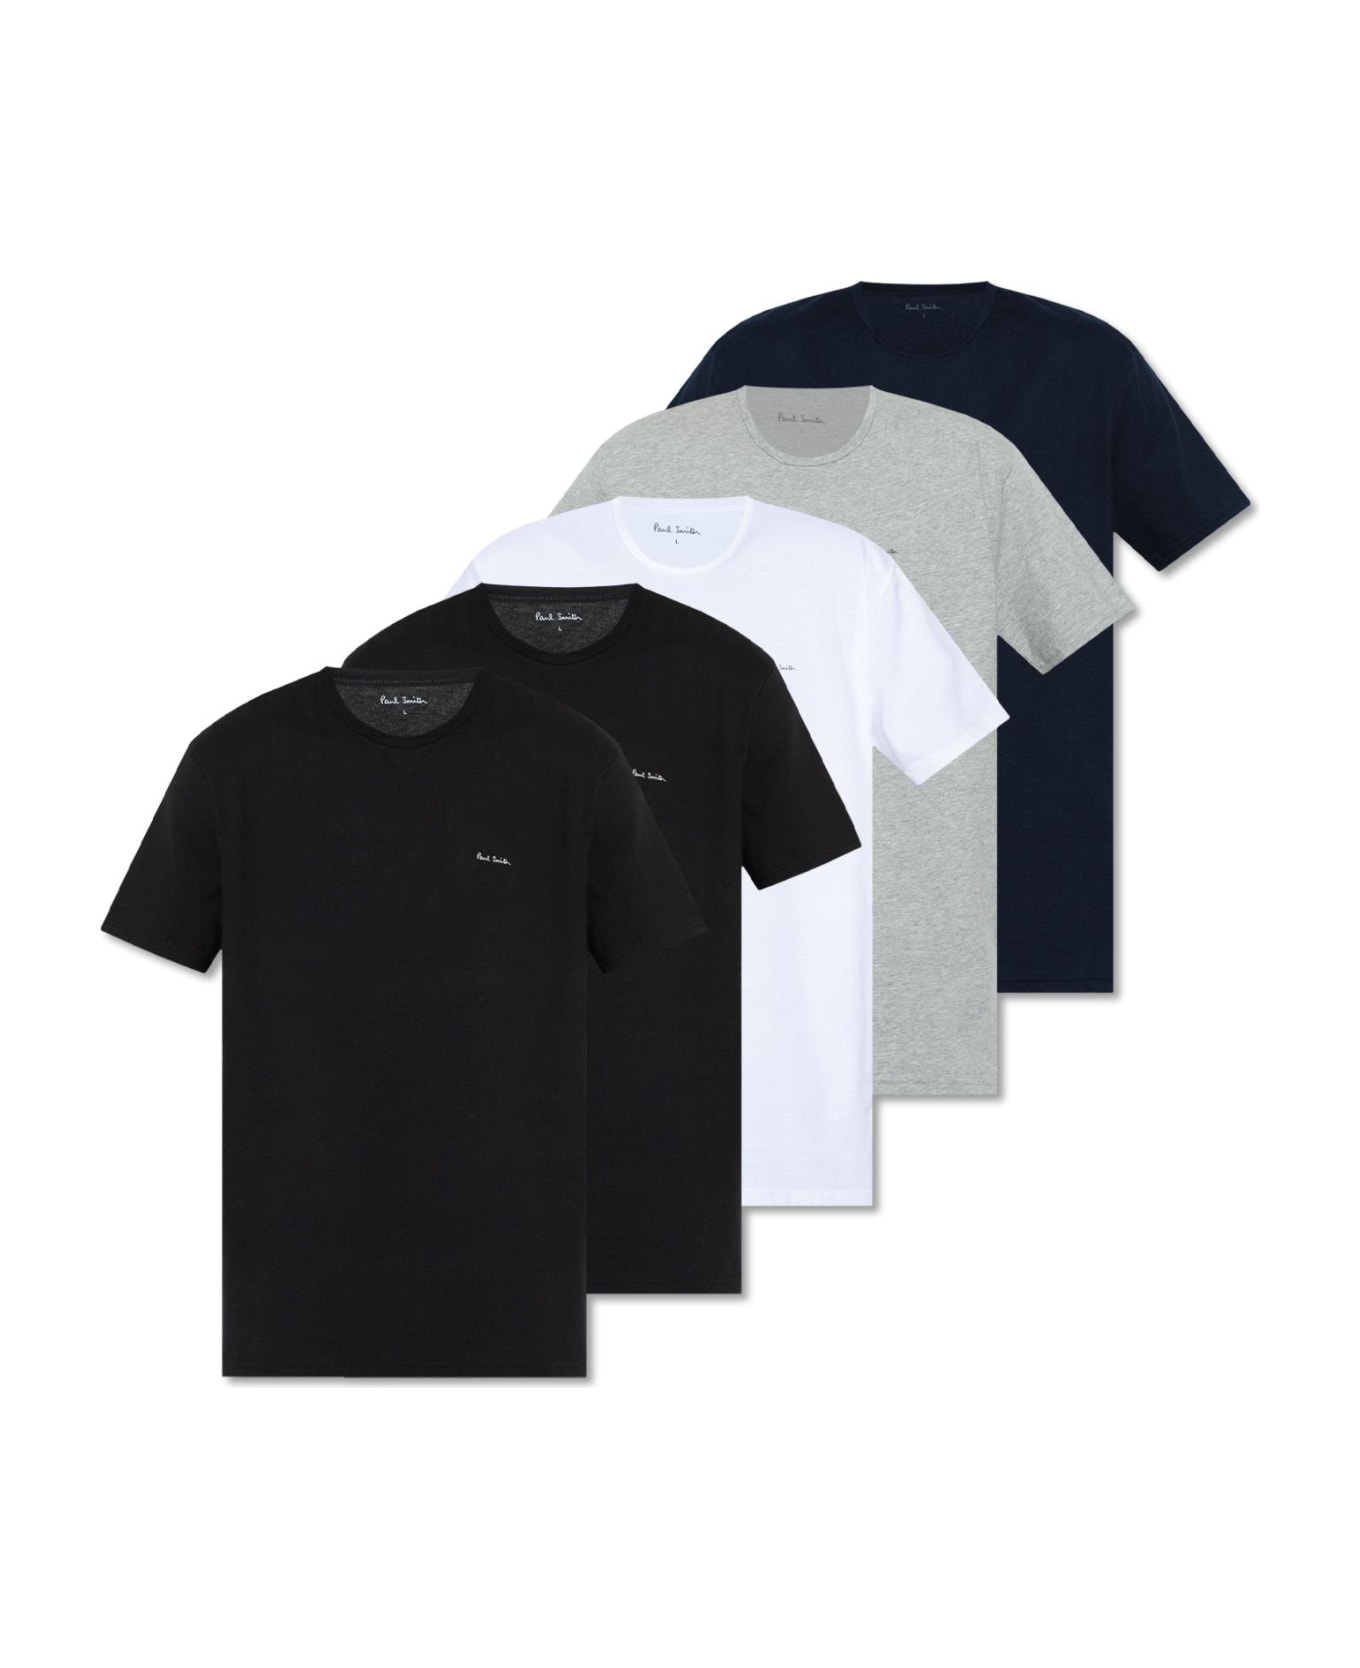 Paul Smith Branded T-shirt Five-pack - MIXED PLATE 1